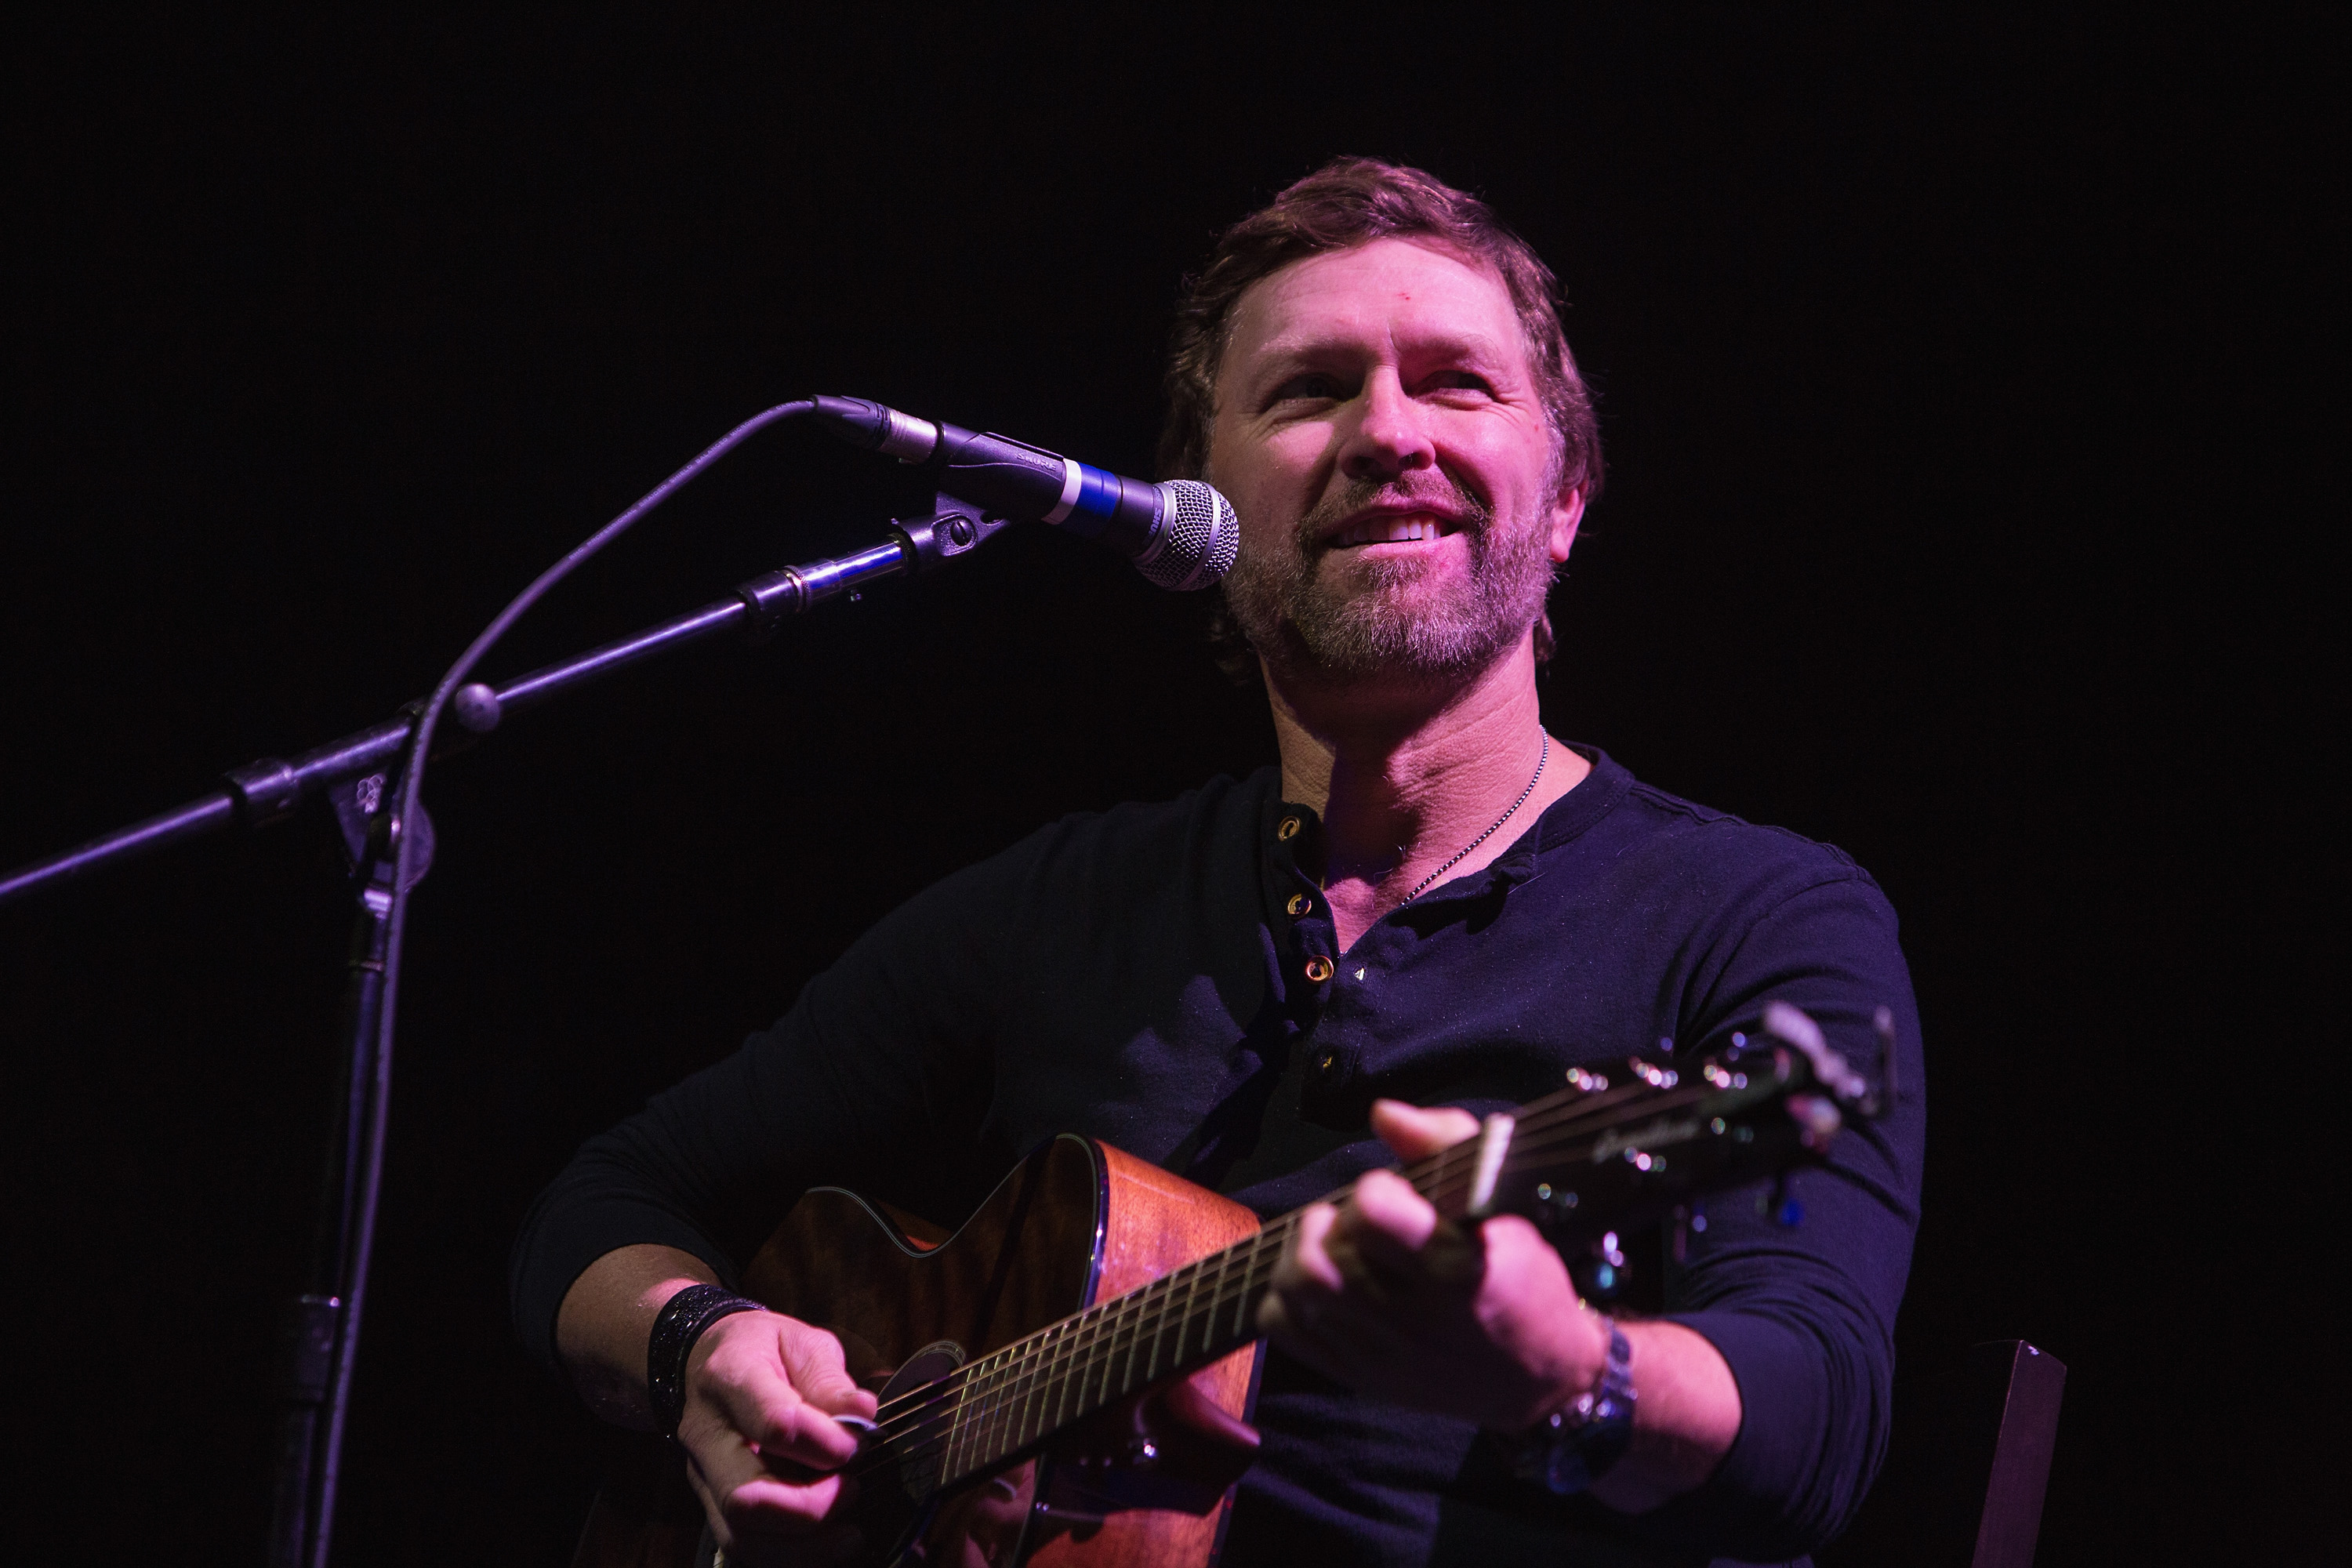 Craig Morgan performs on stage during the Hometown Holiday show on Dec. 10, 2014 in Kent, Washington. (Mat Hayward—Getty Images)